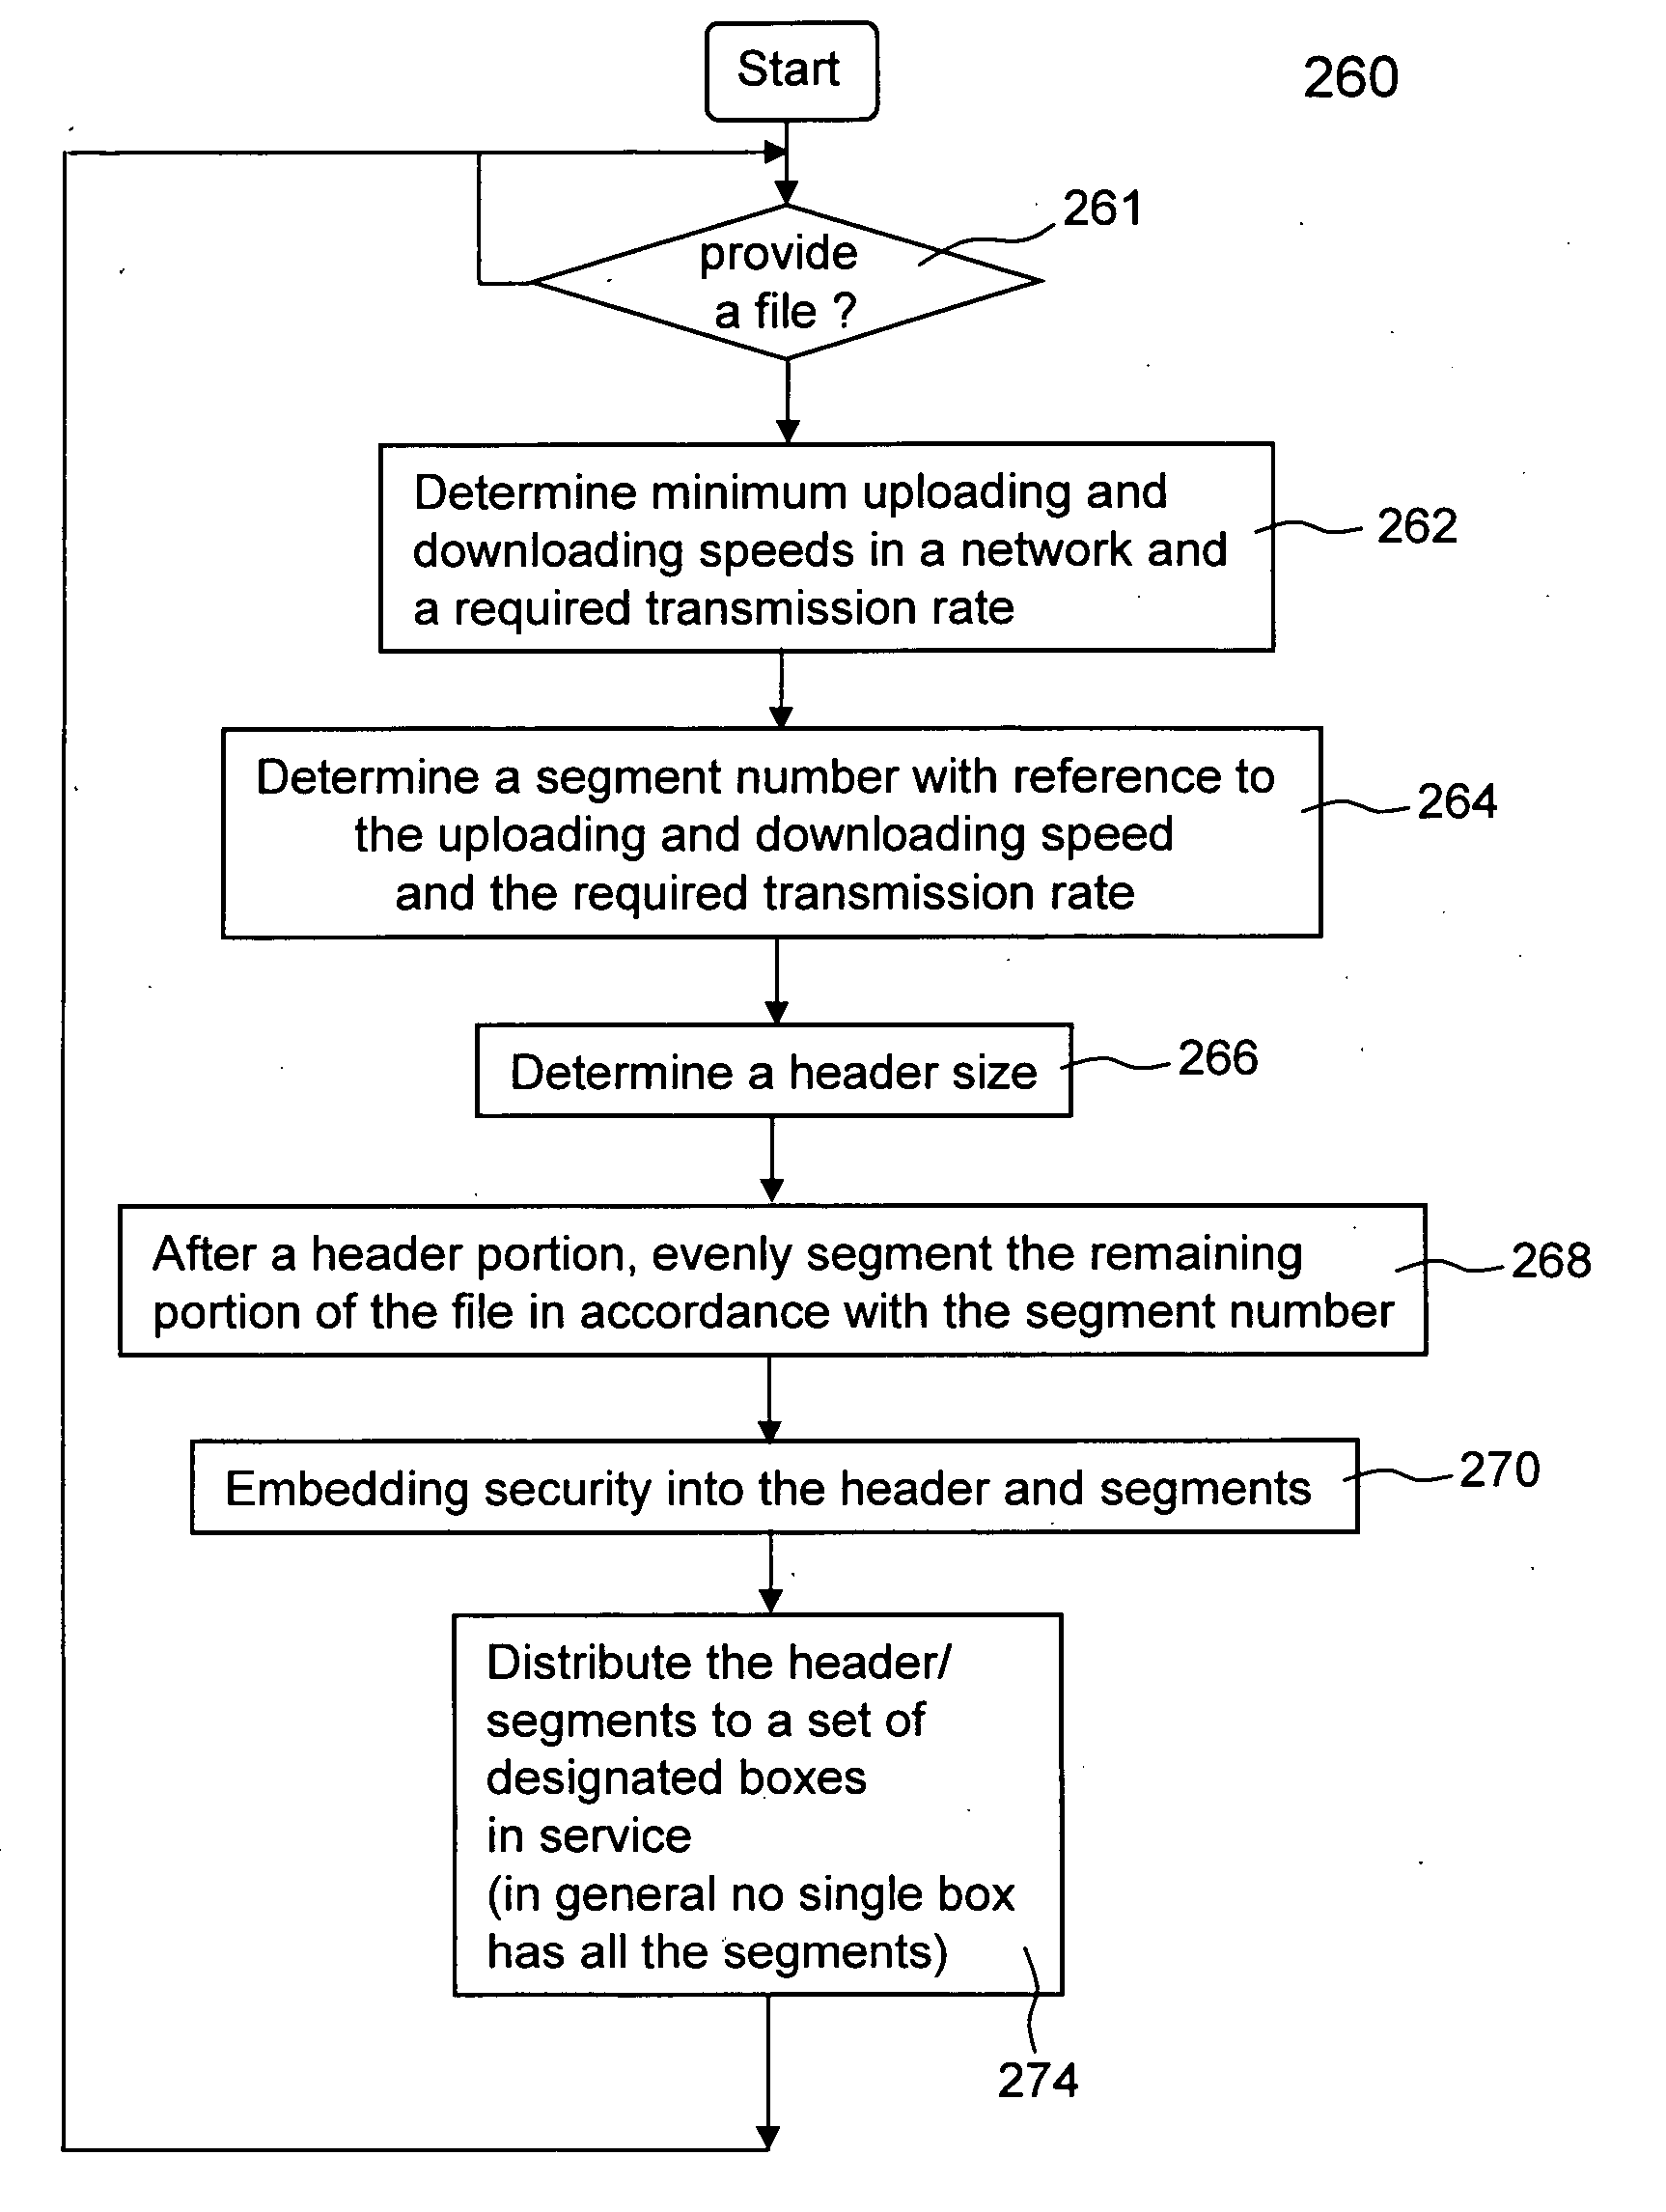 Method and system for providing instantaneous media-on-demand services